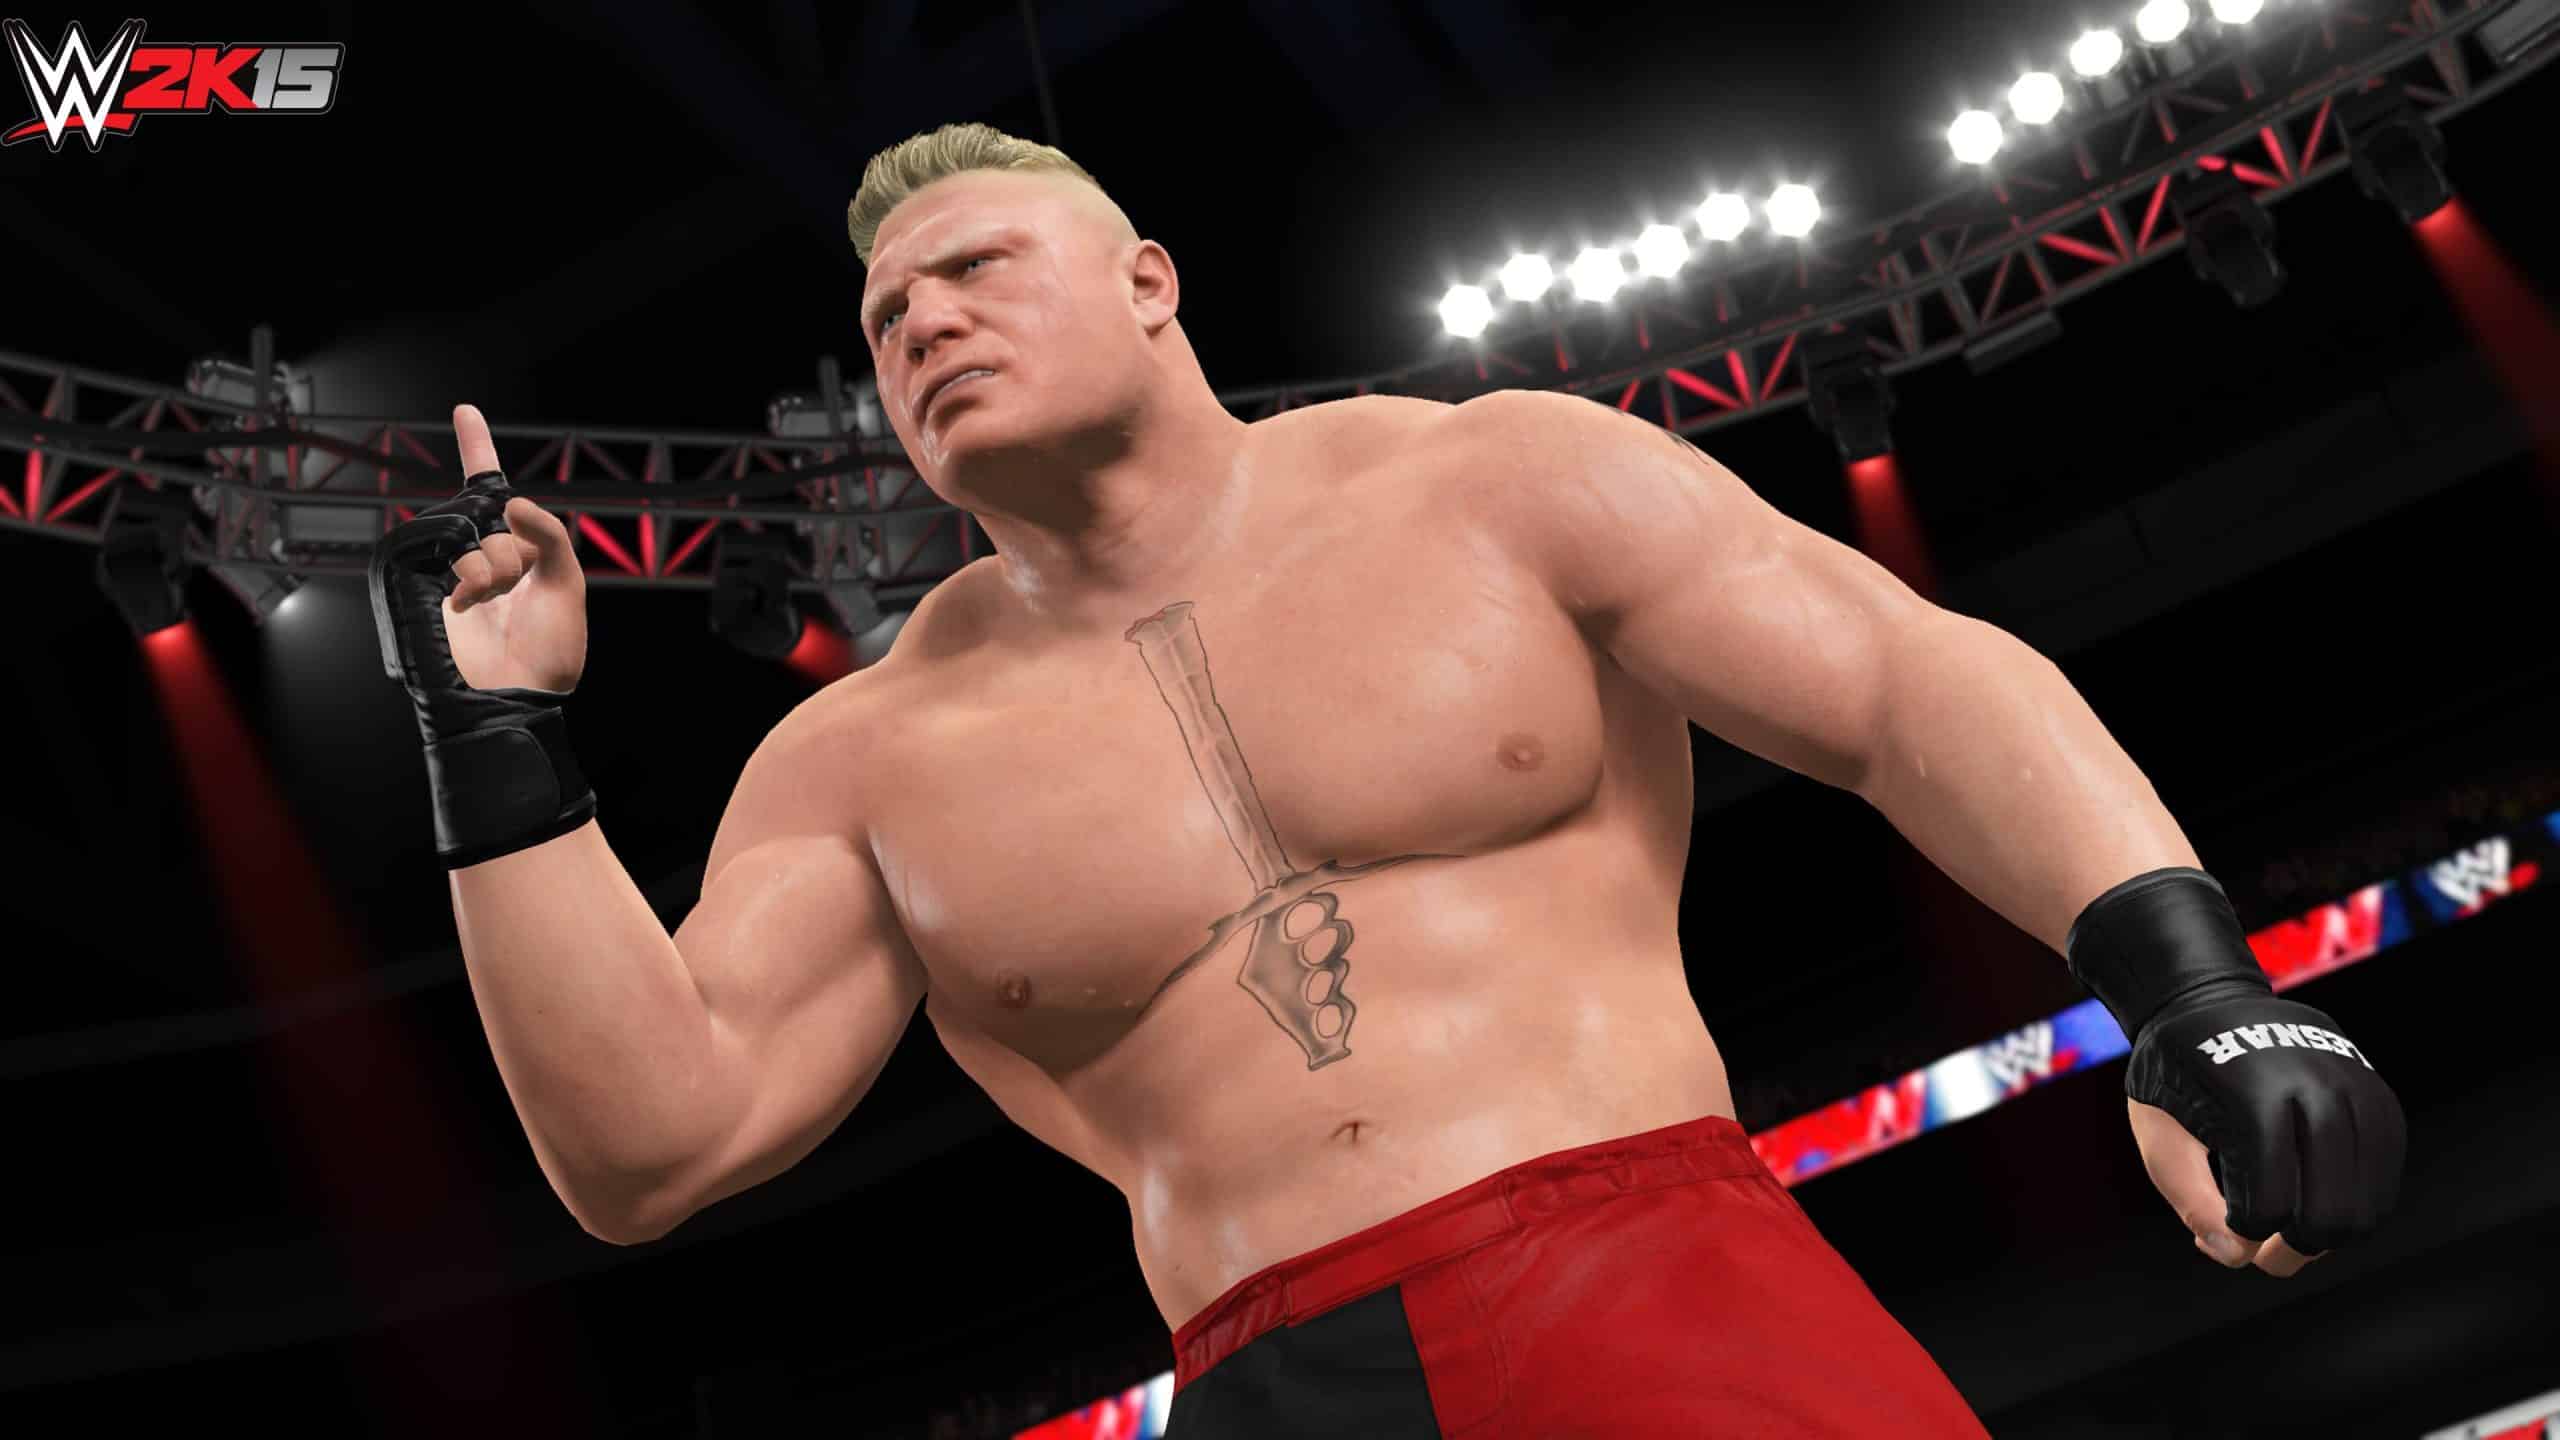 wwe 2k15 pc activation key download